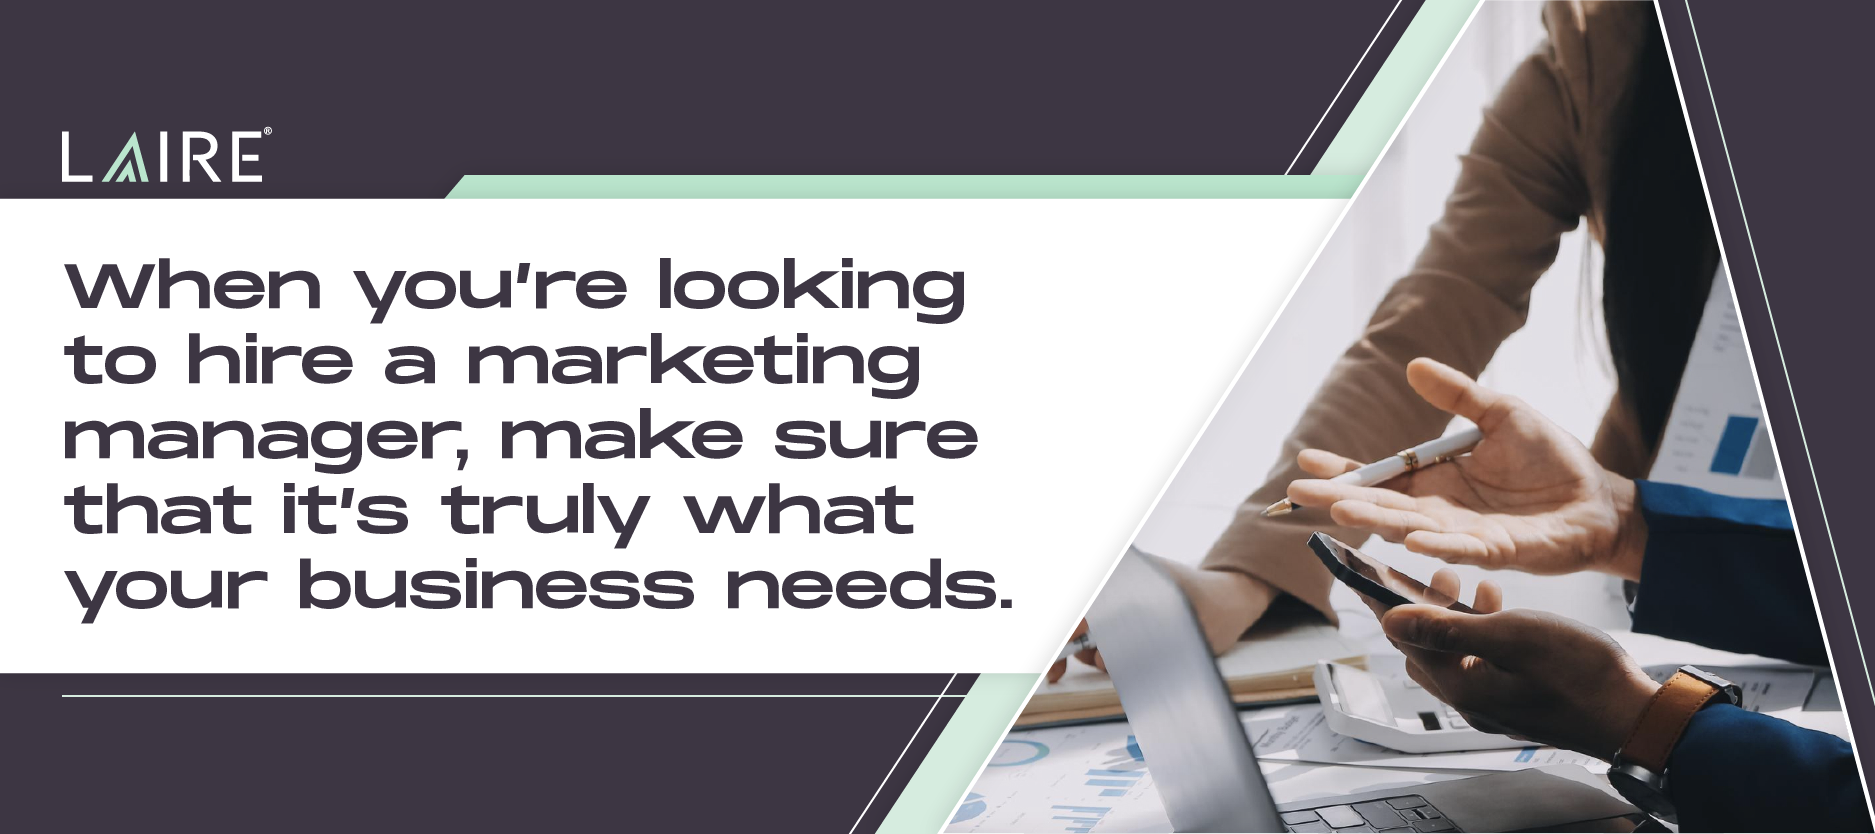 What to Look for in a Marketing Manager Hire-03